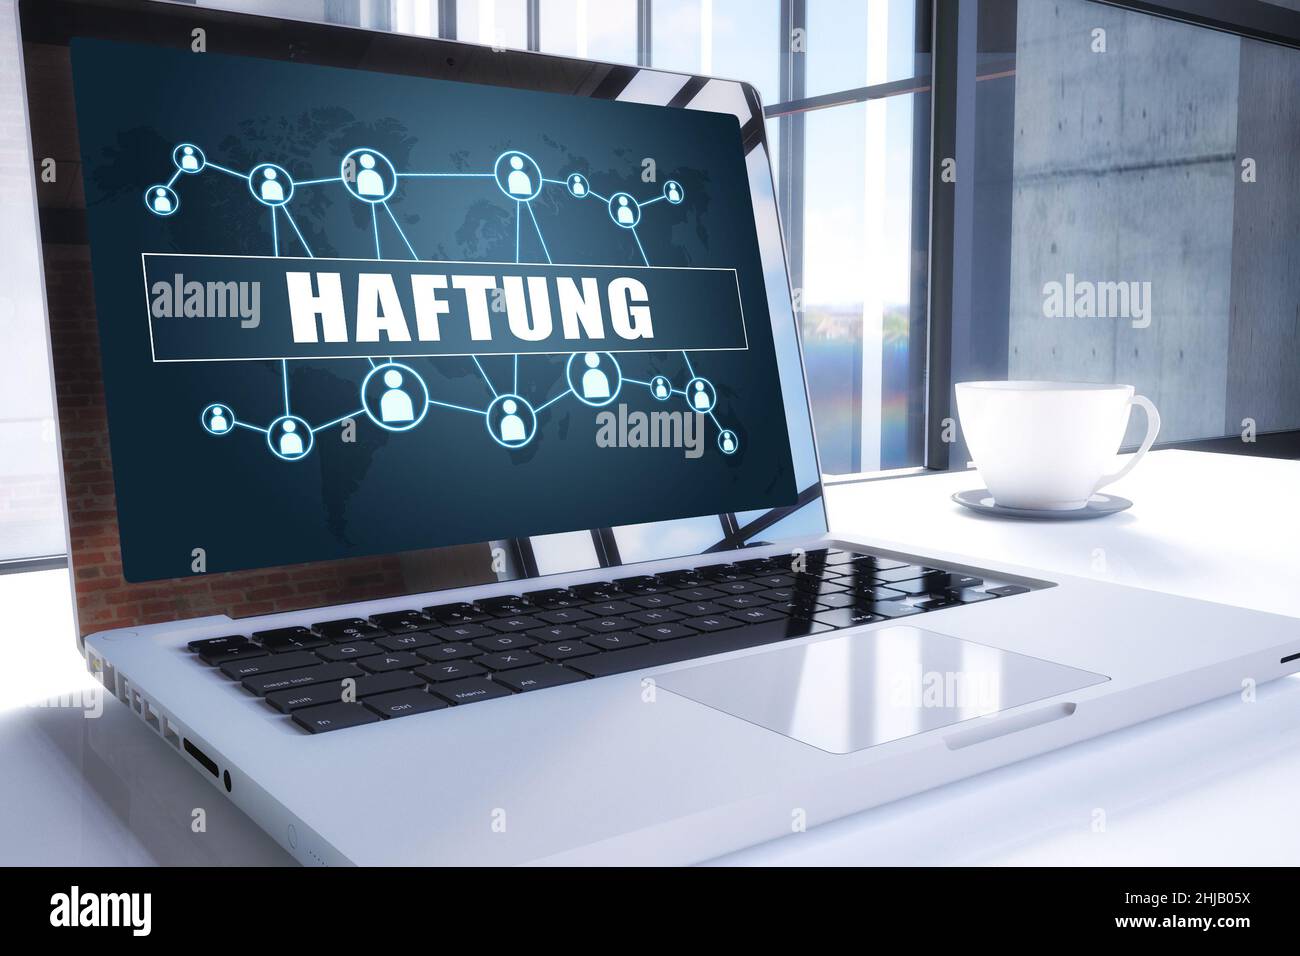 Haftung - german word for liability. Text on modern laptop screen in office environment. 3D render illustration business text concept. Stock Photo